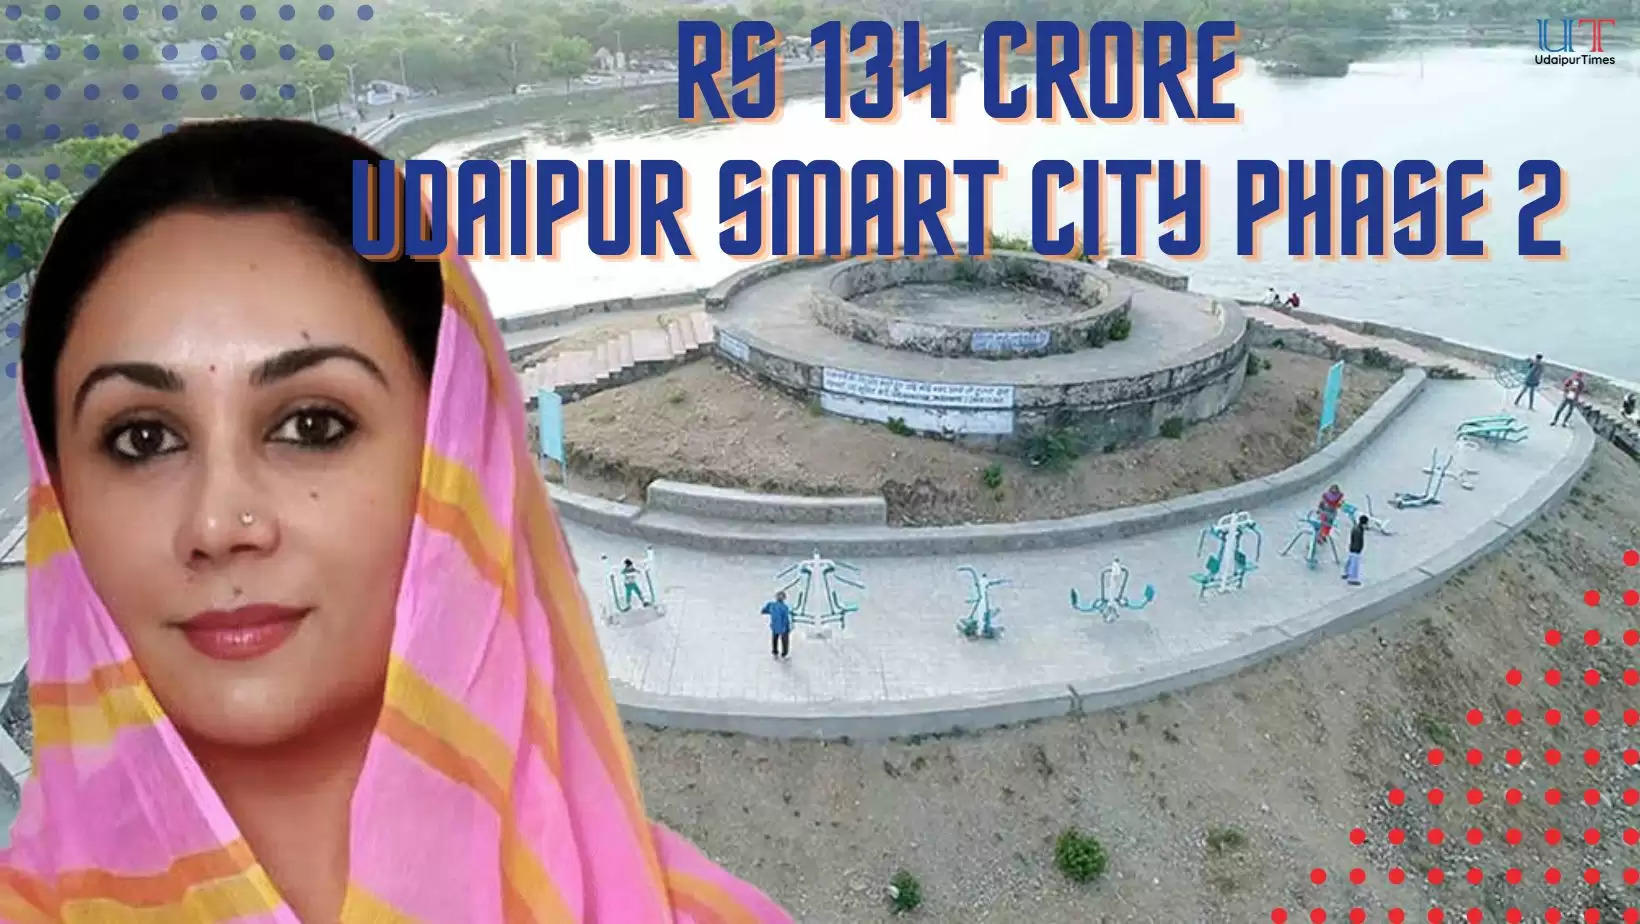 Deputy Chief Minister of Rajasthan Diya Kumari Rs. 134 crore approved for Udaipur Smart City Mission Phase 2.0